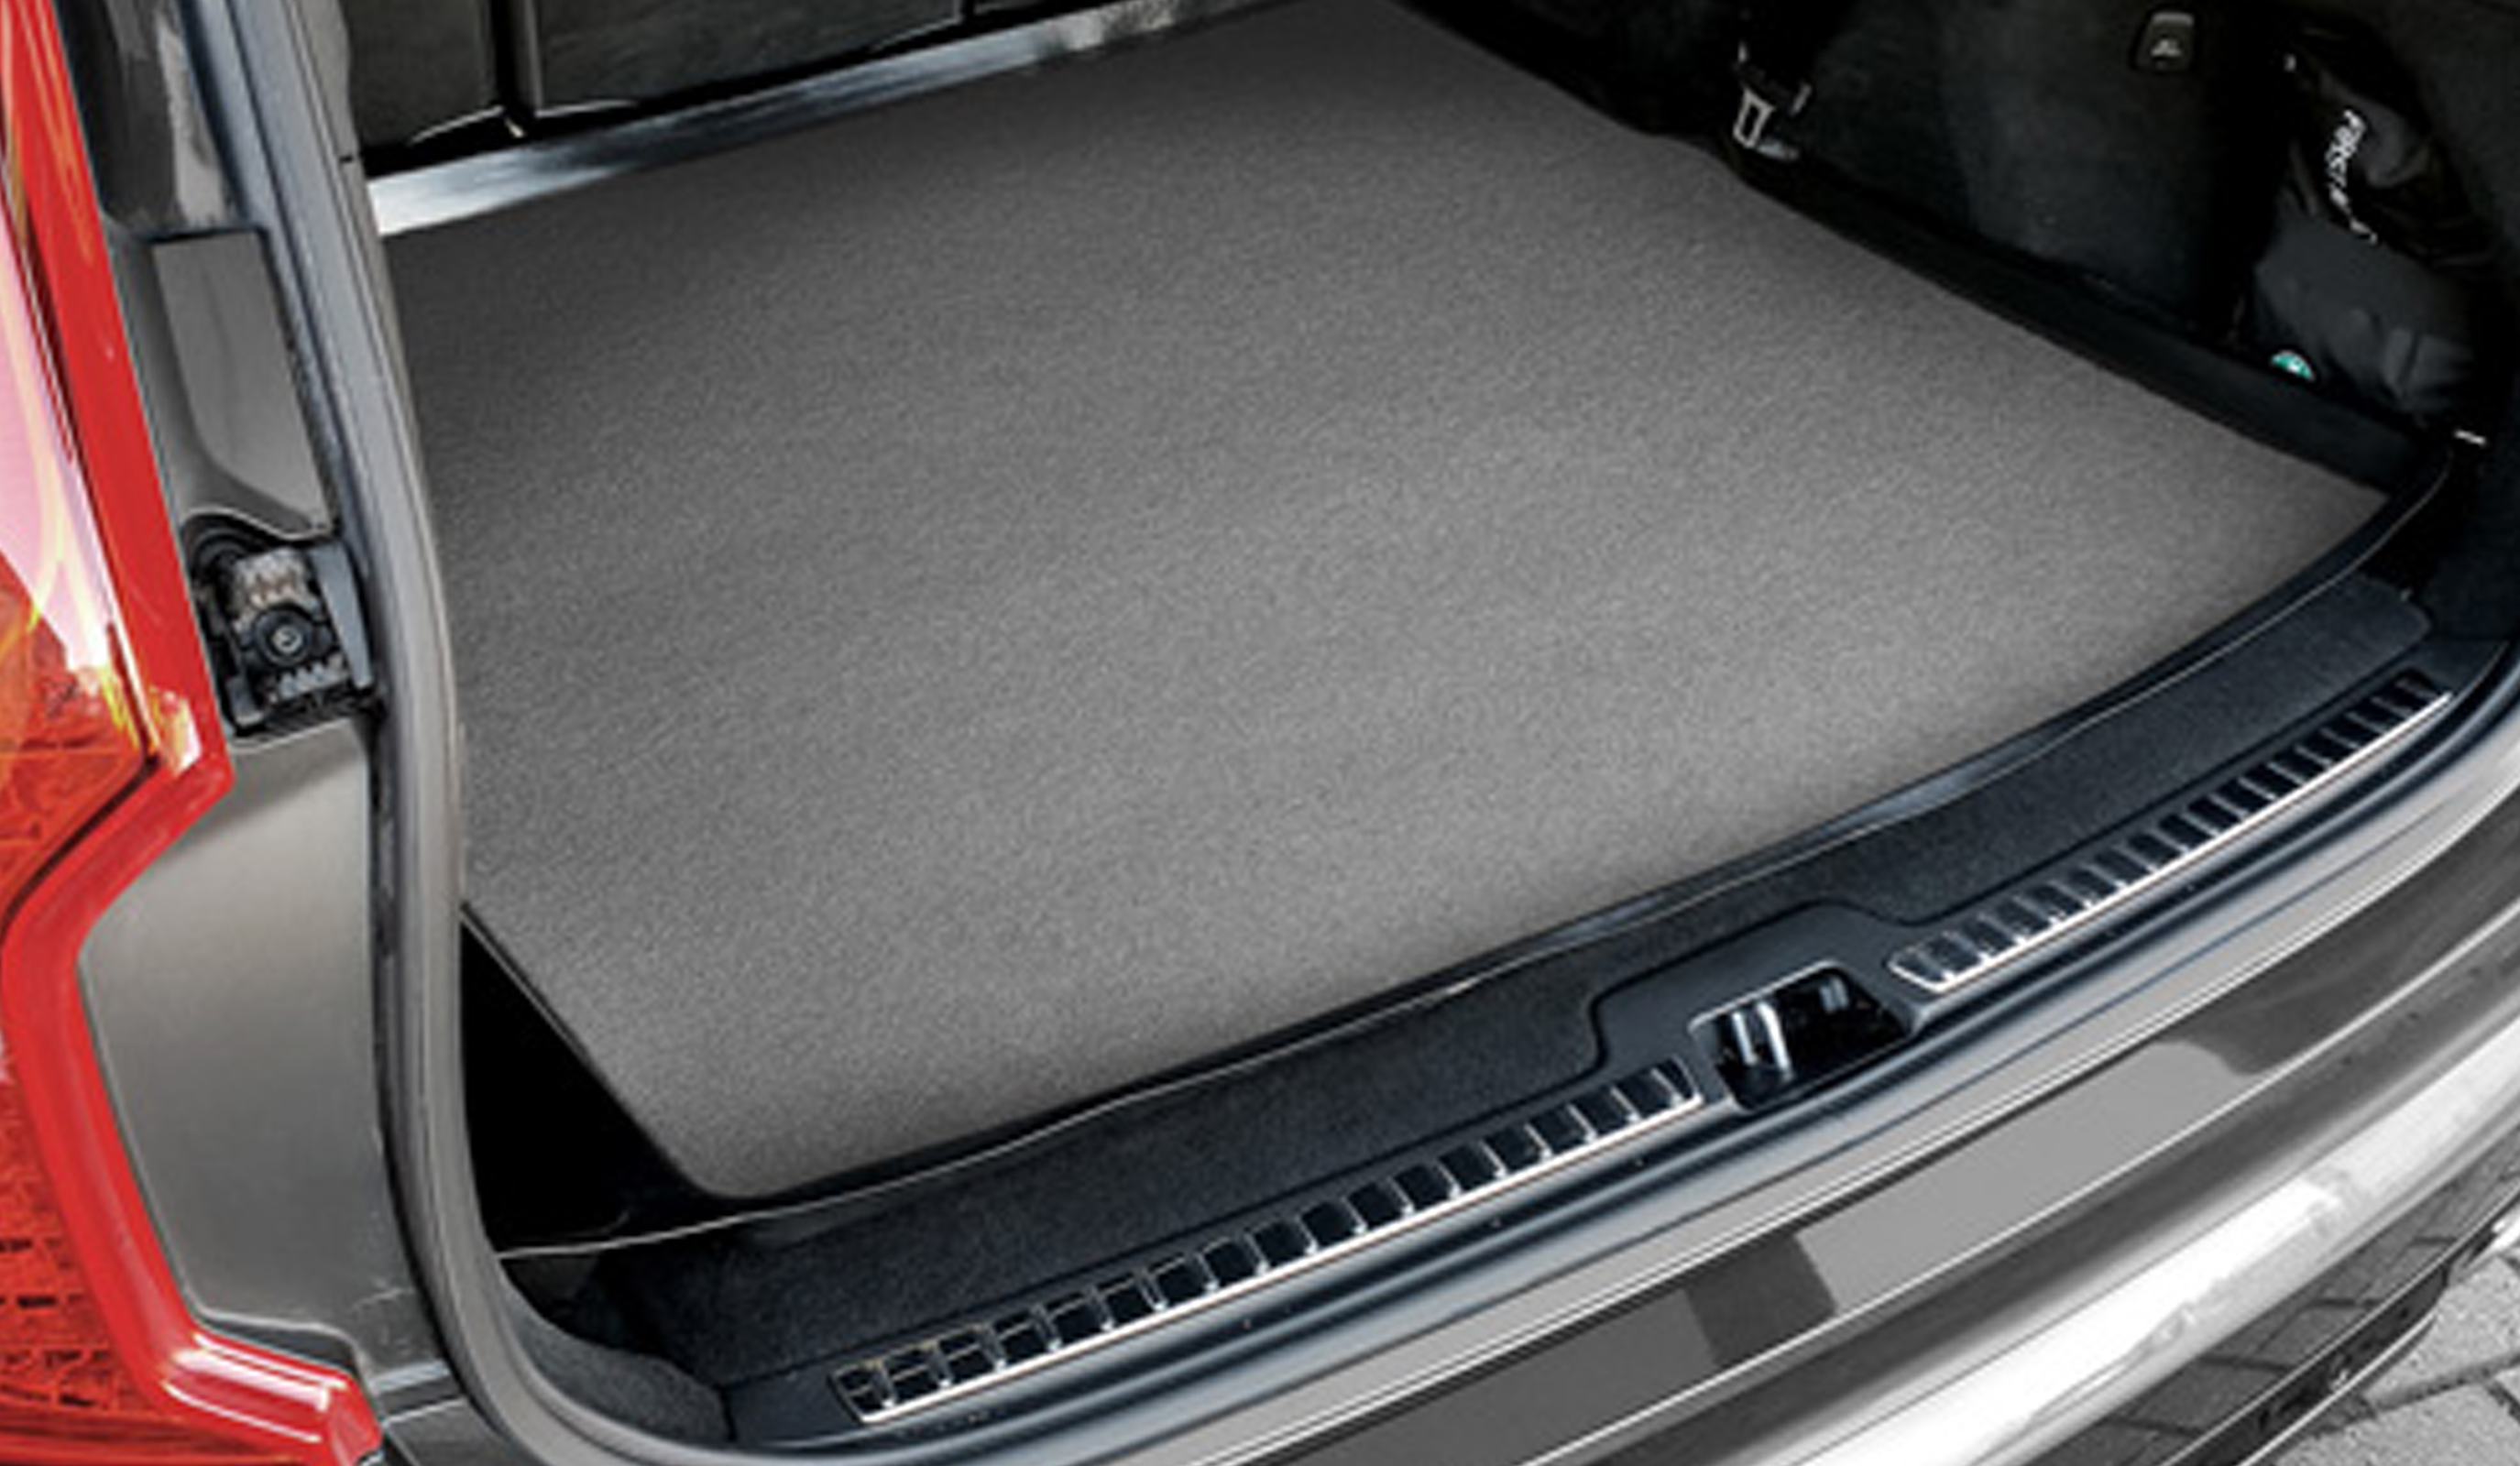 carmats4u Tailored Boot Liner//Mat//Tray for Duster 4x4 2010-2017 /& Removable Anti-Slip Anthracite Carpet Insert